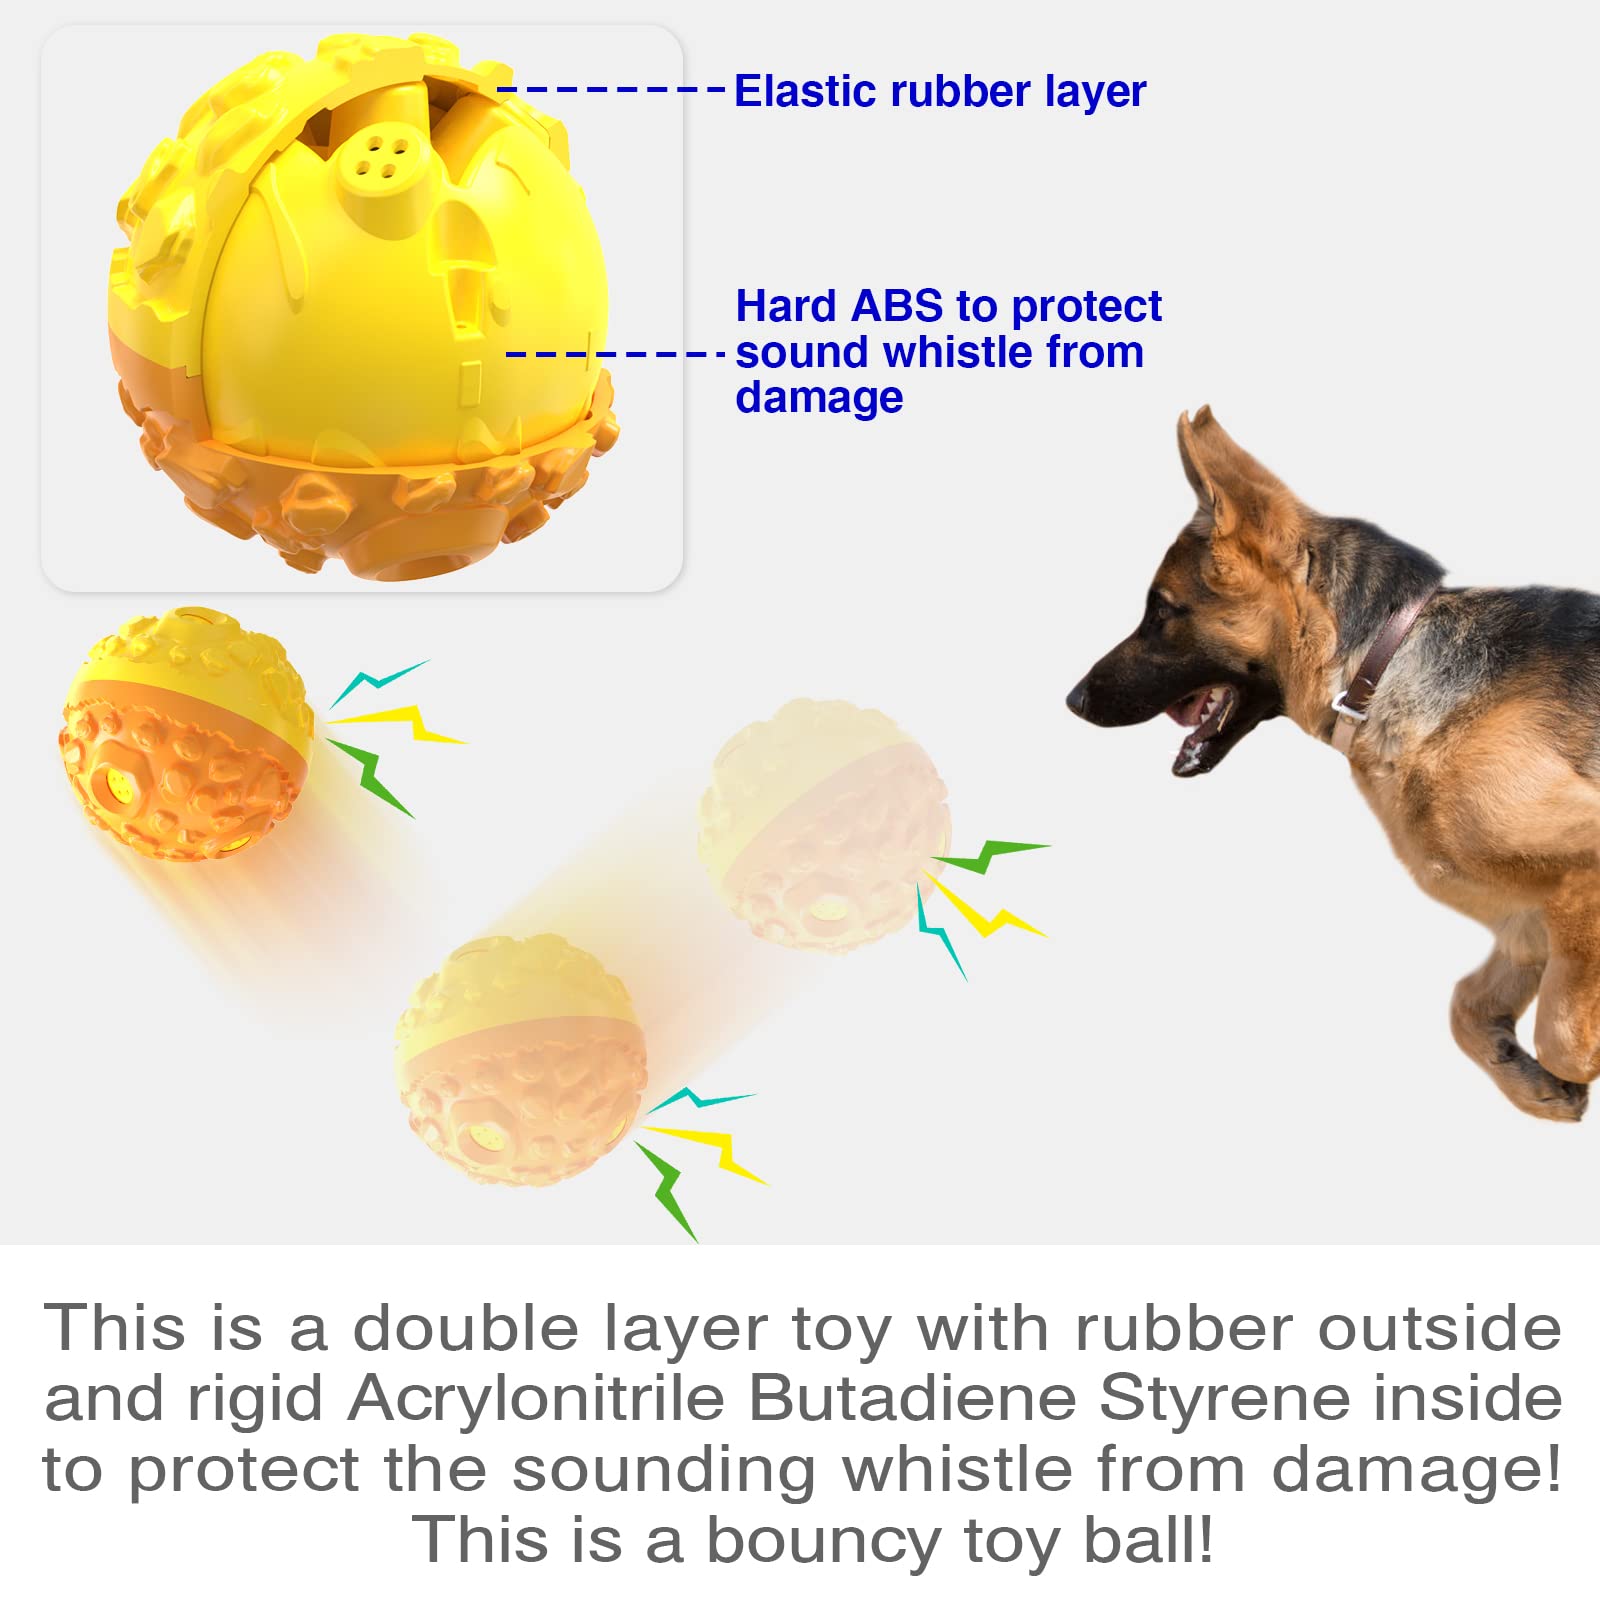 Squeaky Dog Toy Ball Reliable Rubber Squeaker Fun Interactive Toys